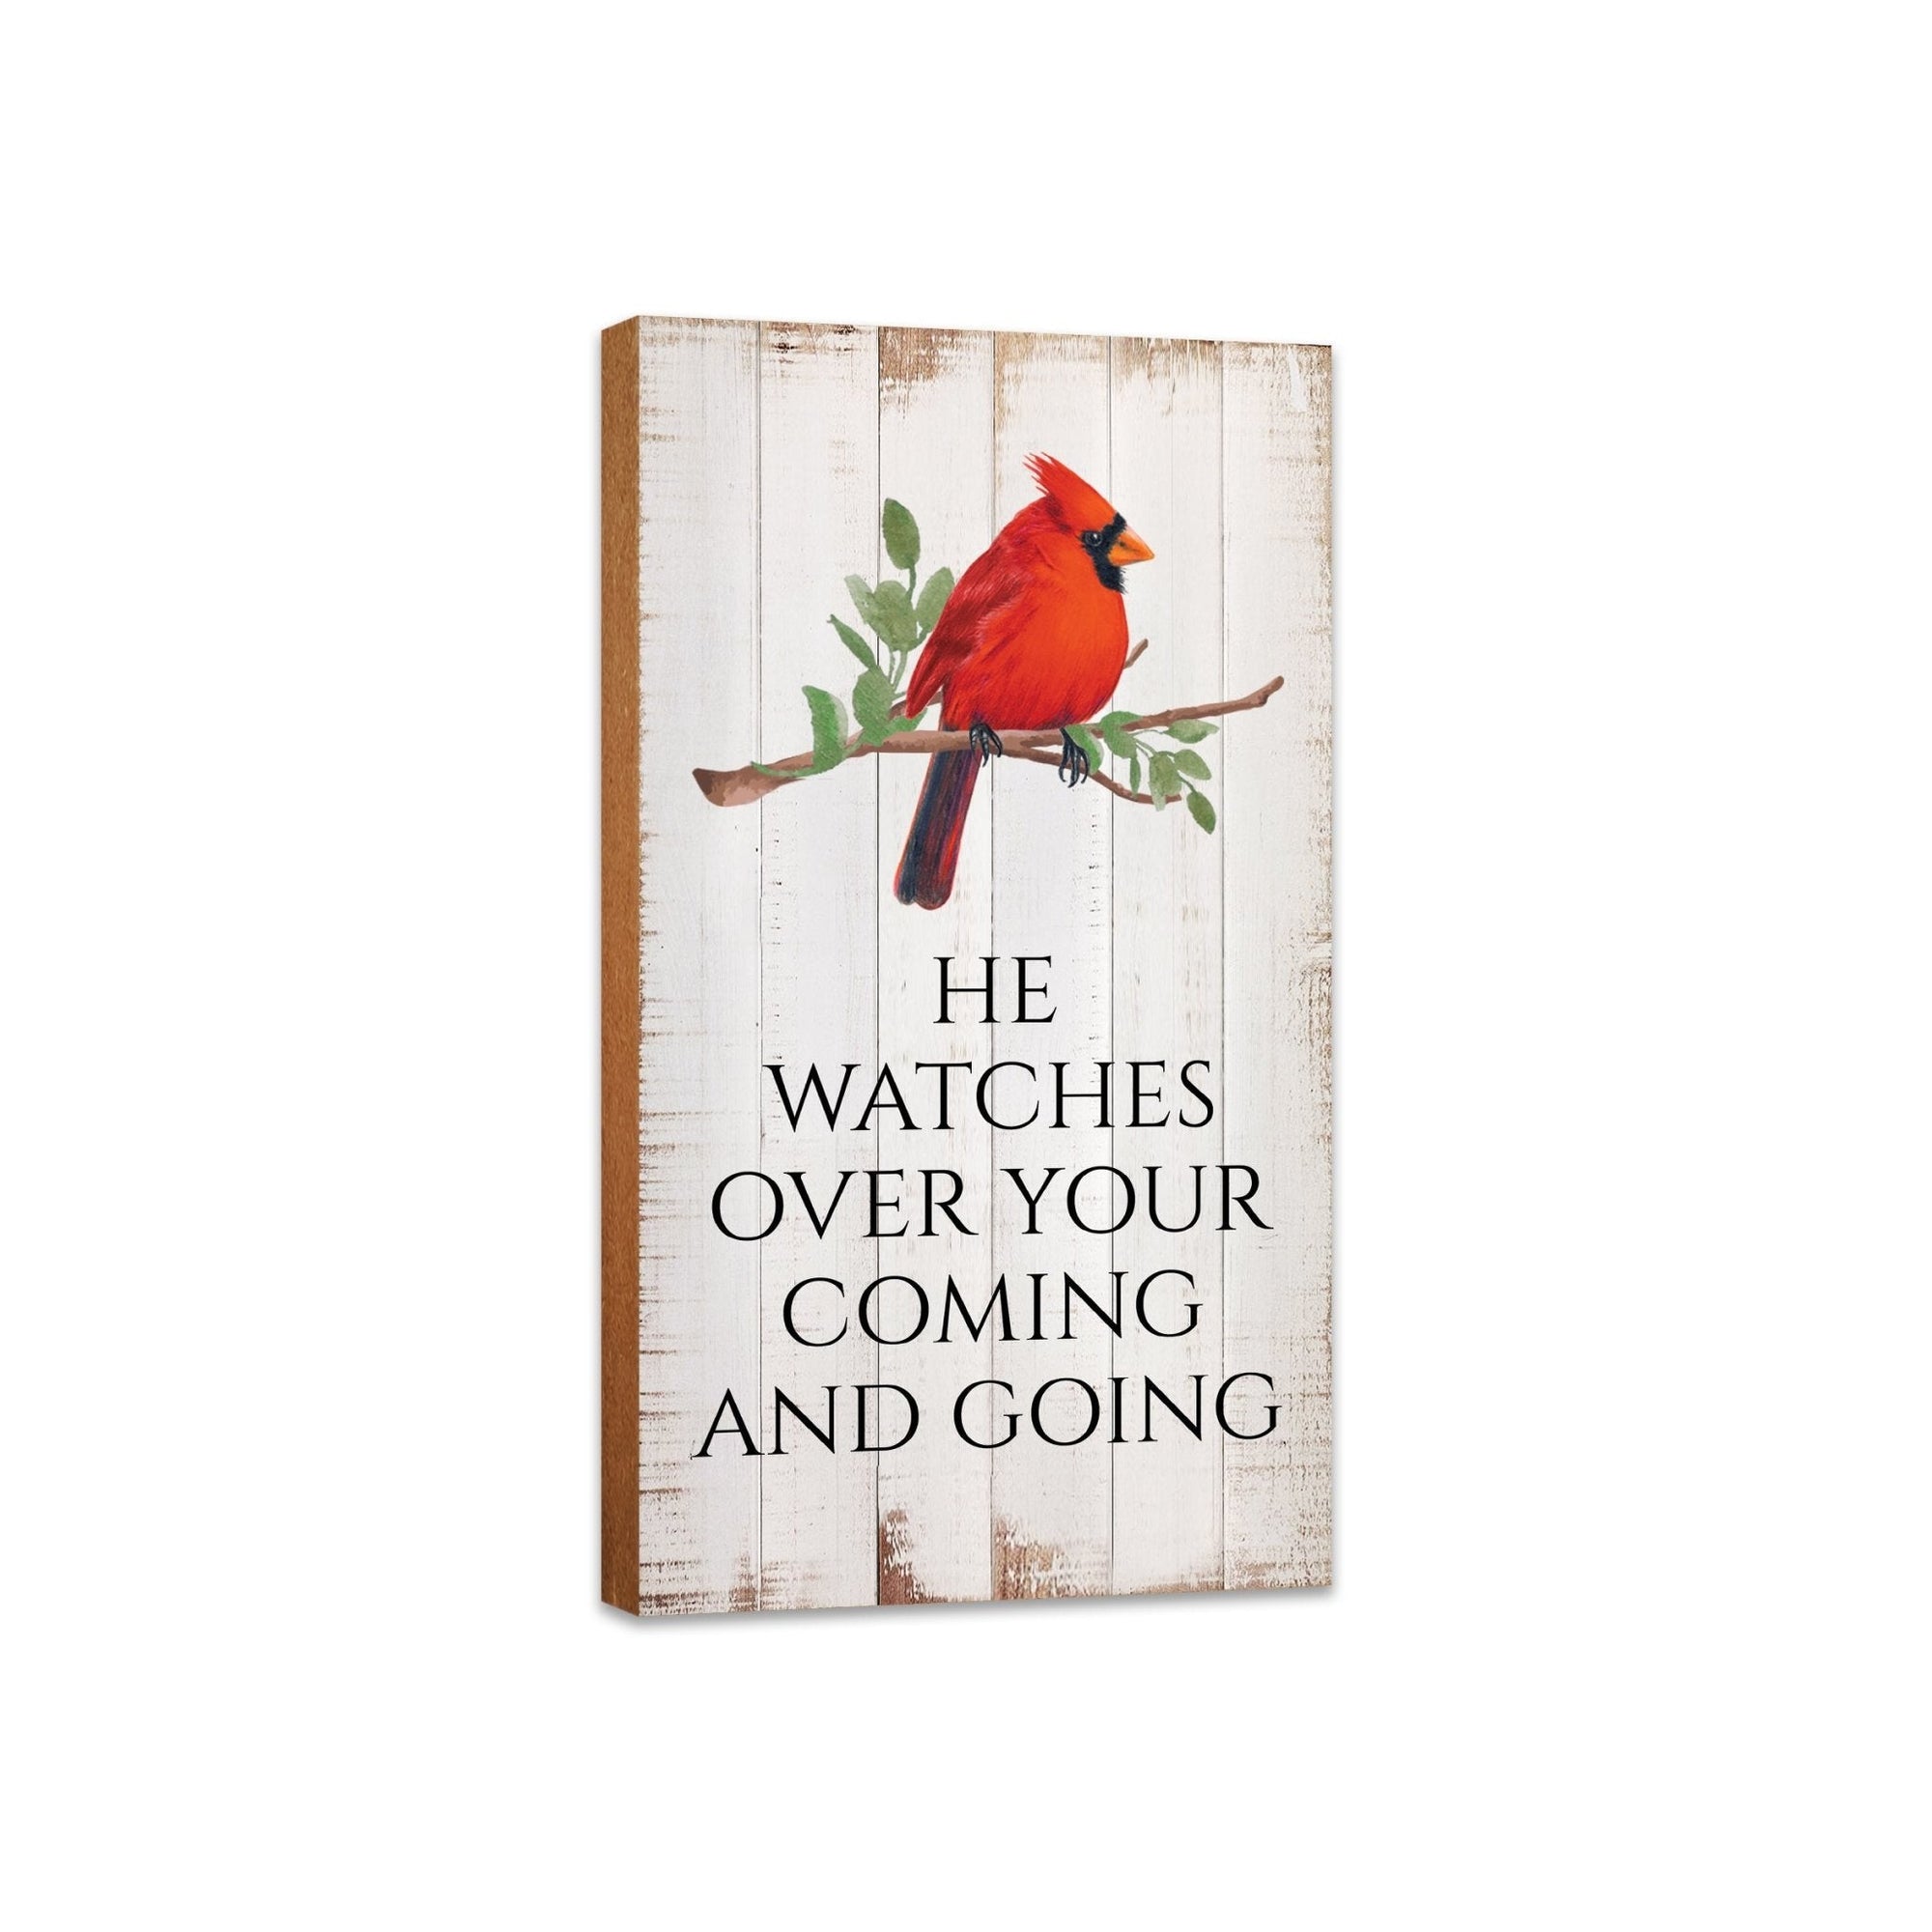 Lifesong Milestones Inspirational Wooden Wall Plaque Décor